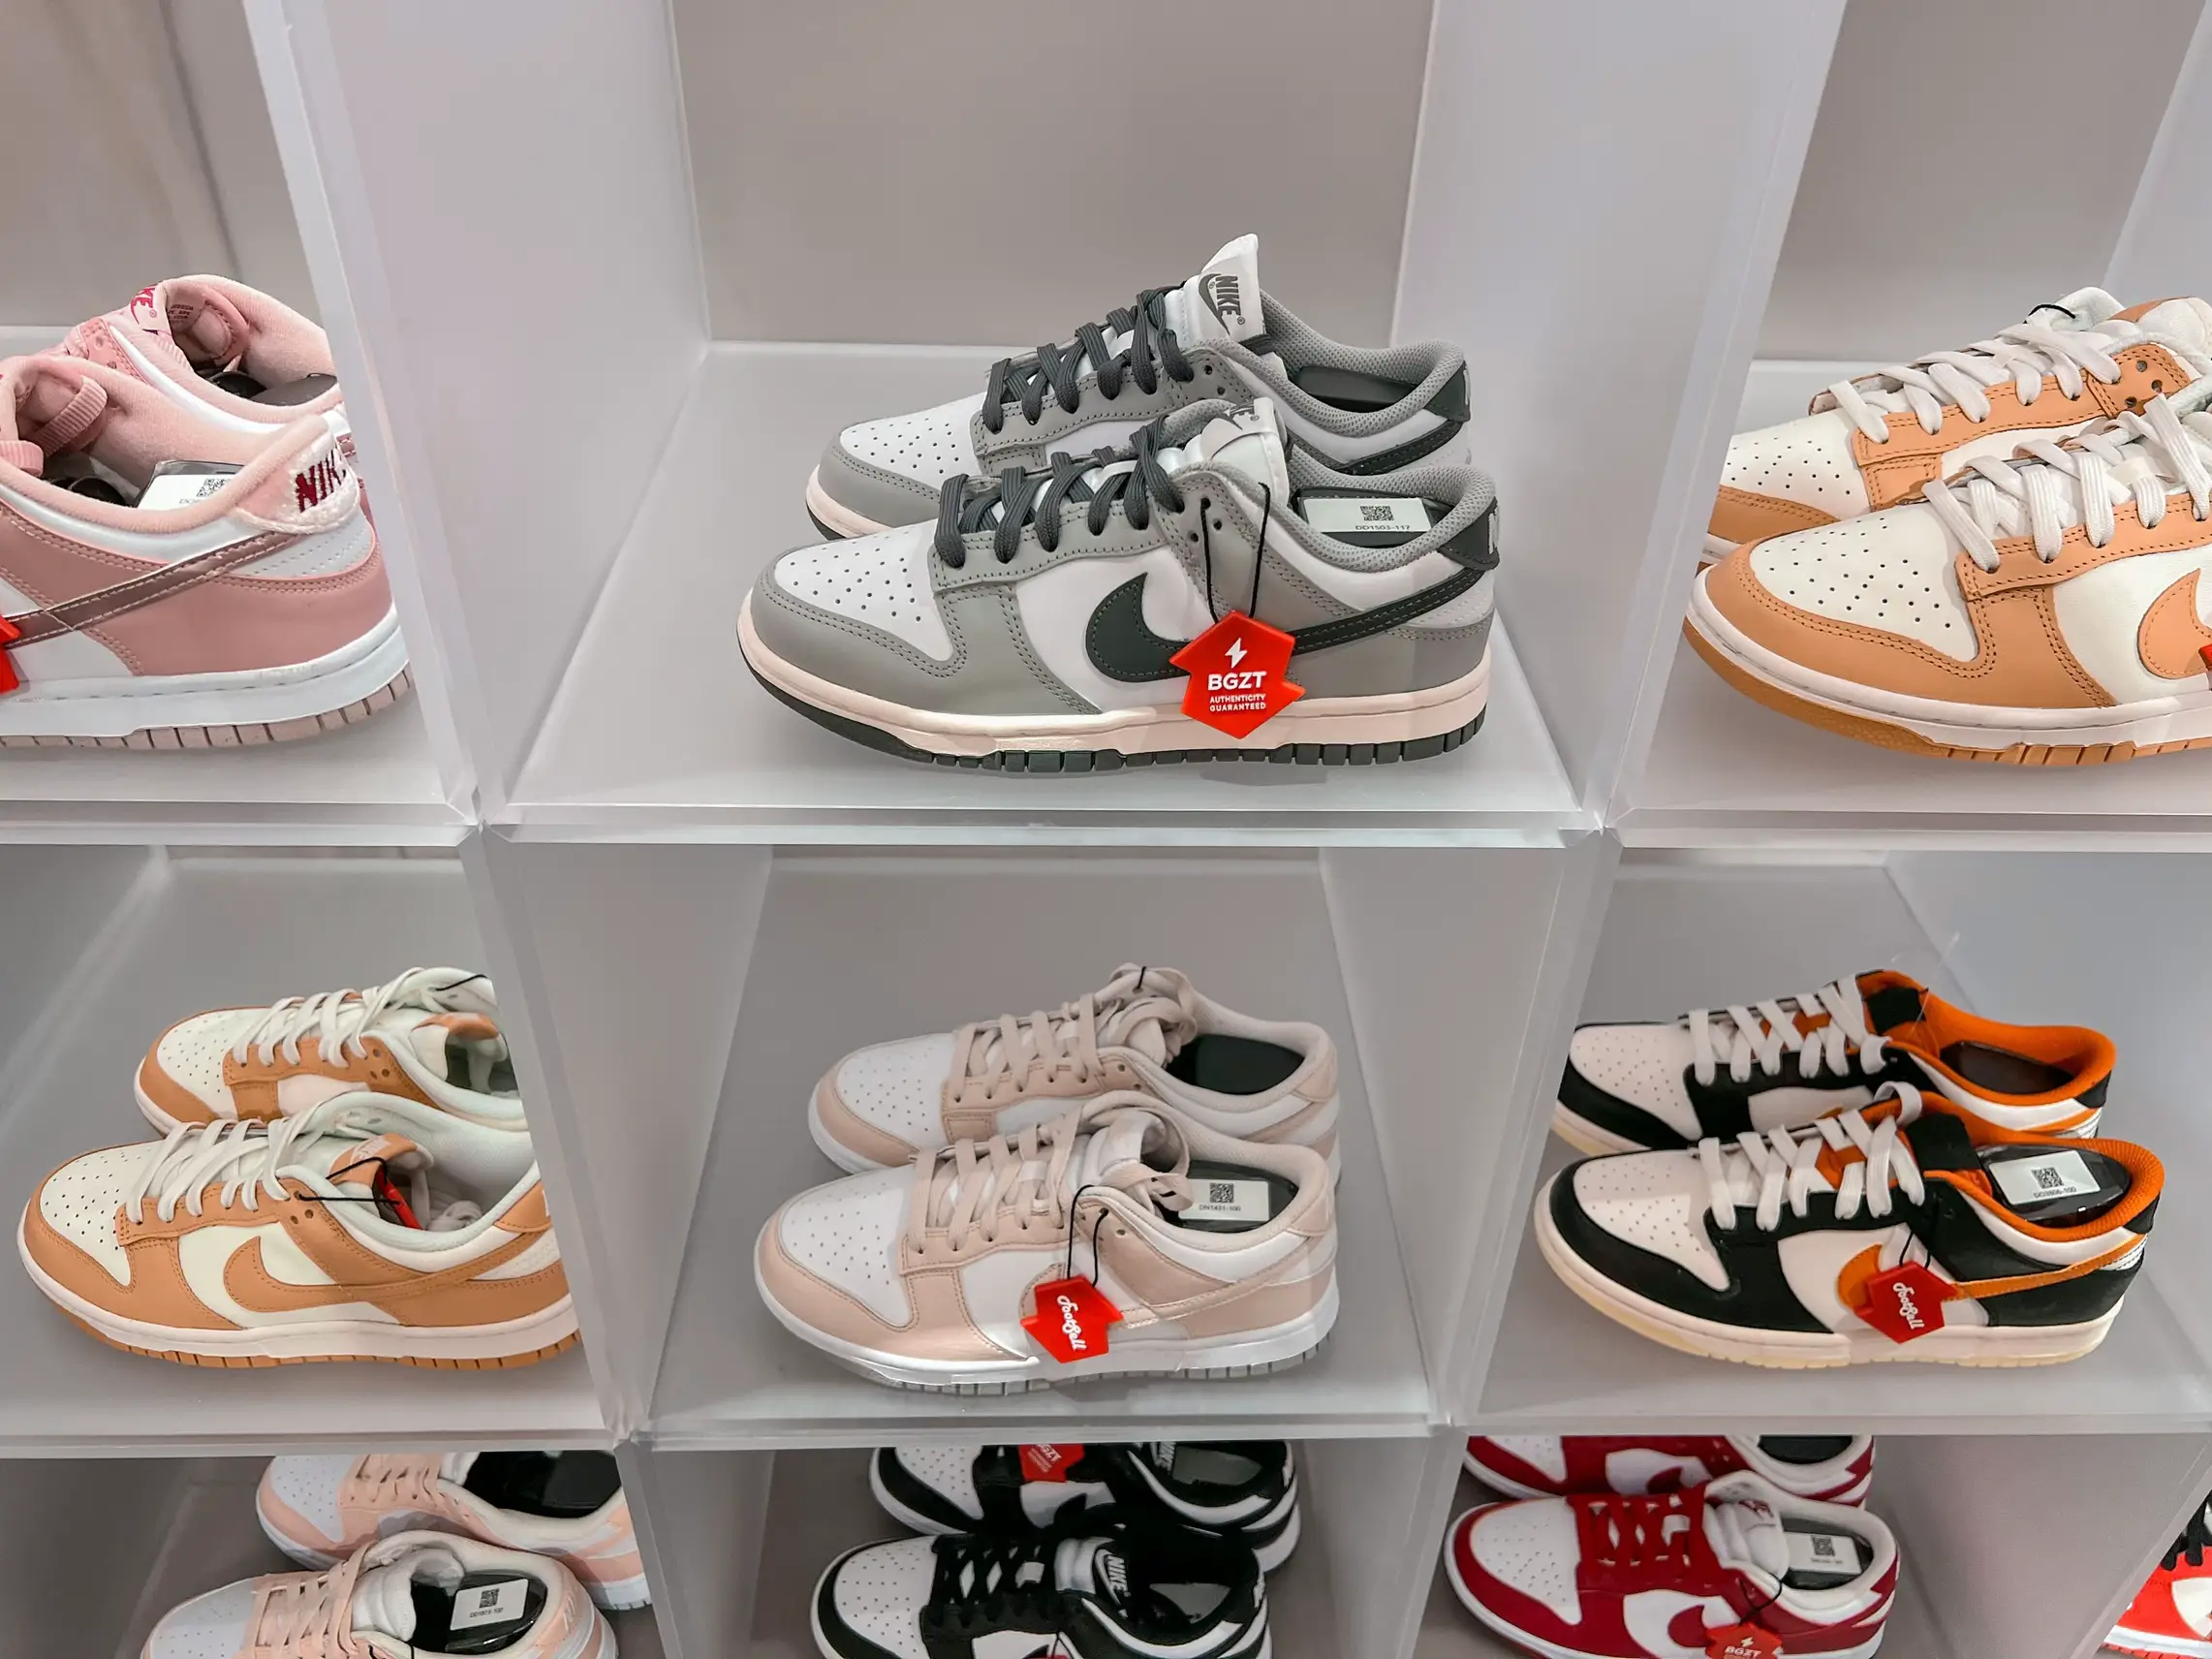 Nike turns its SNKRS app into a pop-up shop for sneakerheads